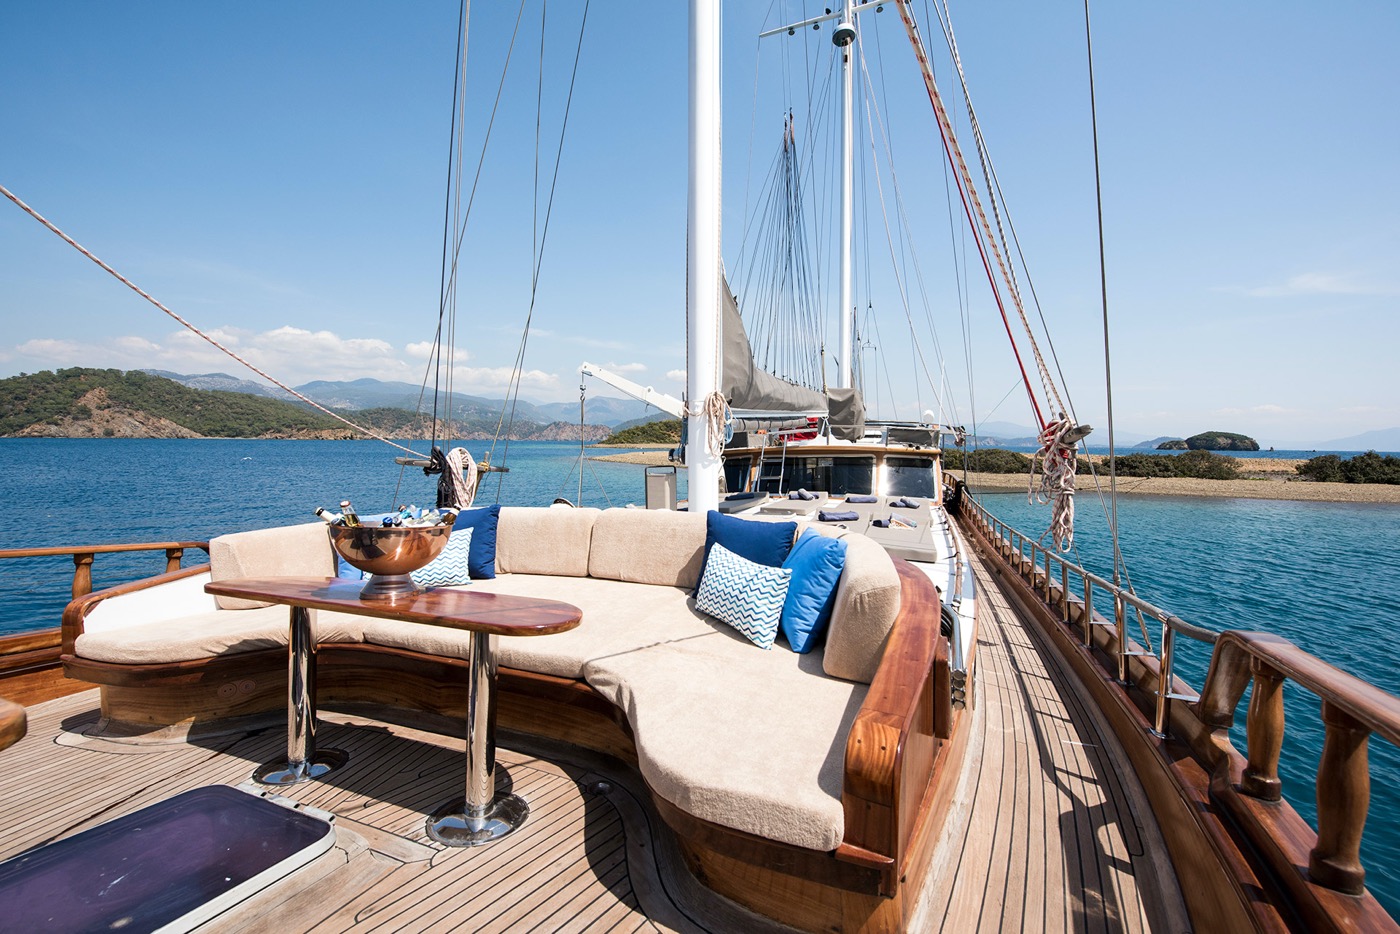 Relax on the comfortable foredeck